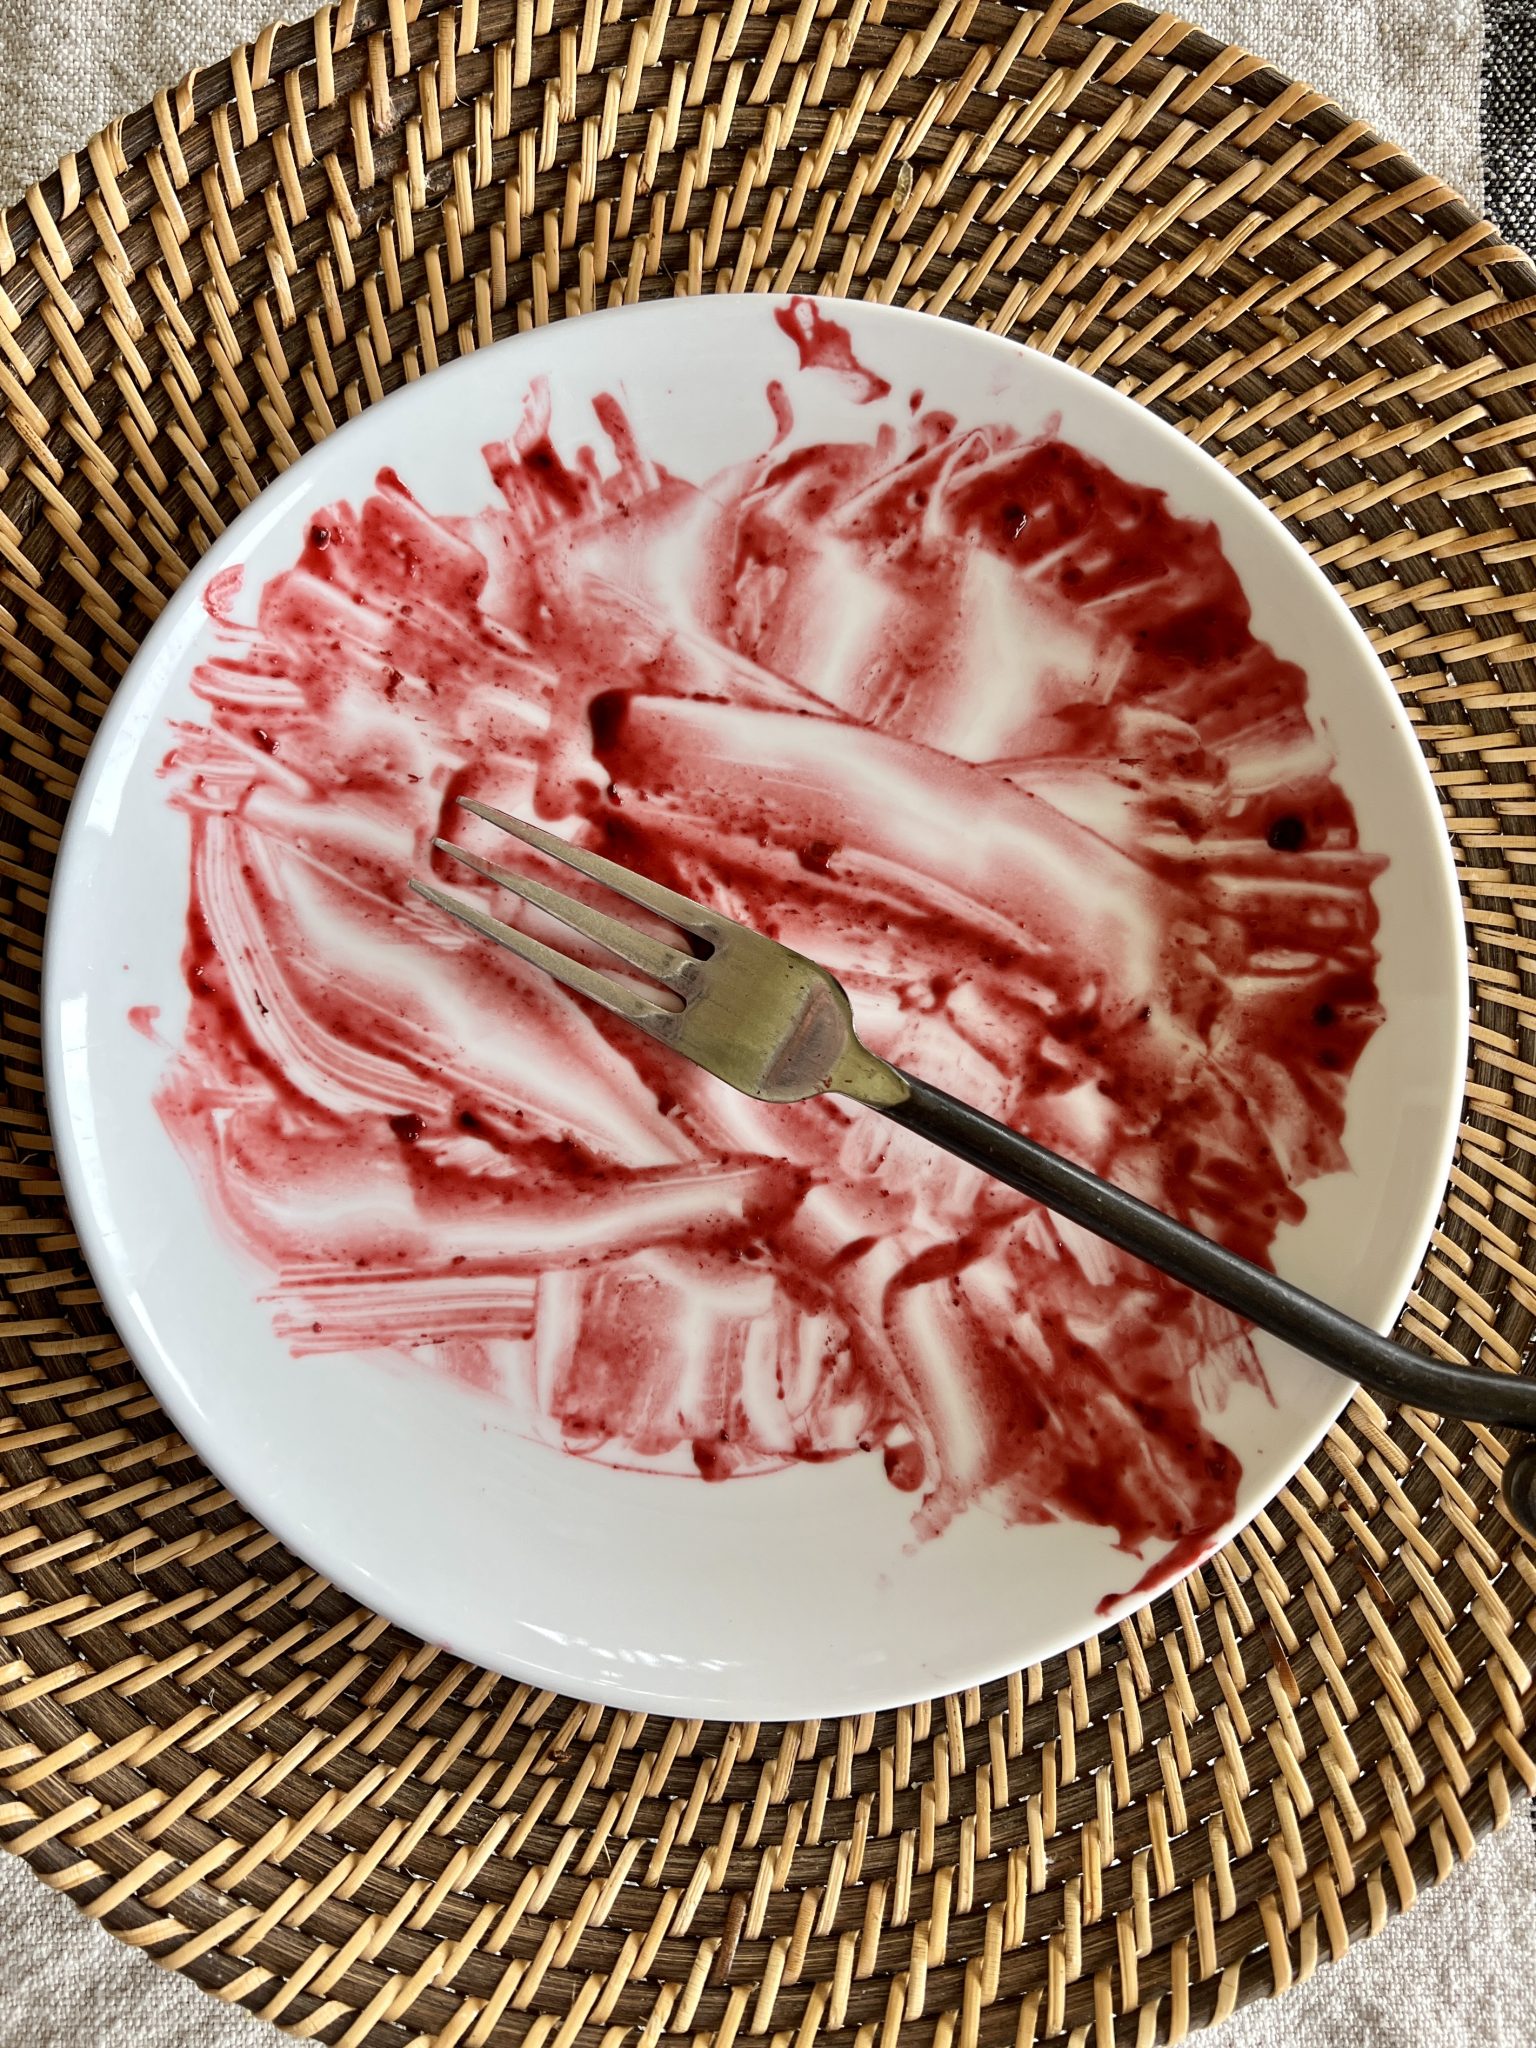 An empty plate with berry compote streaks.